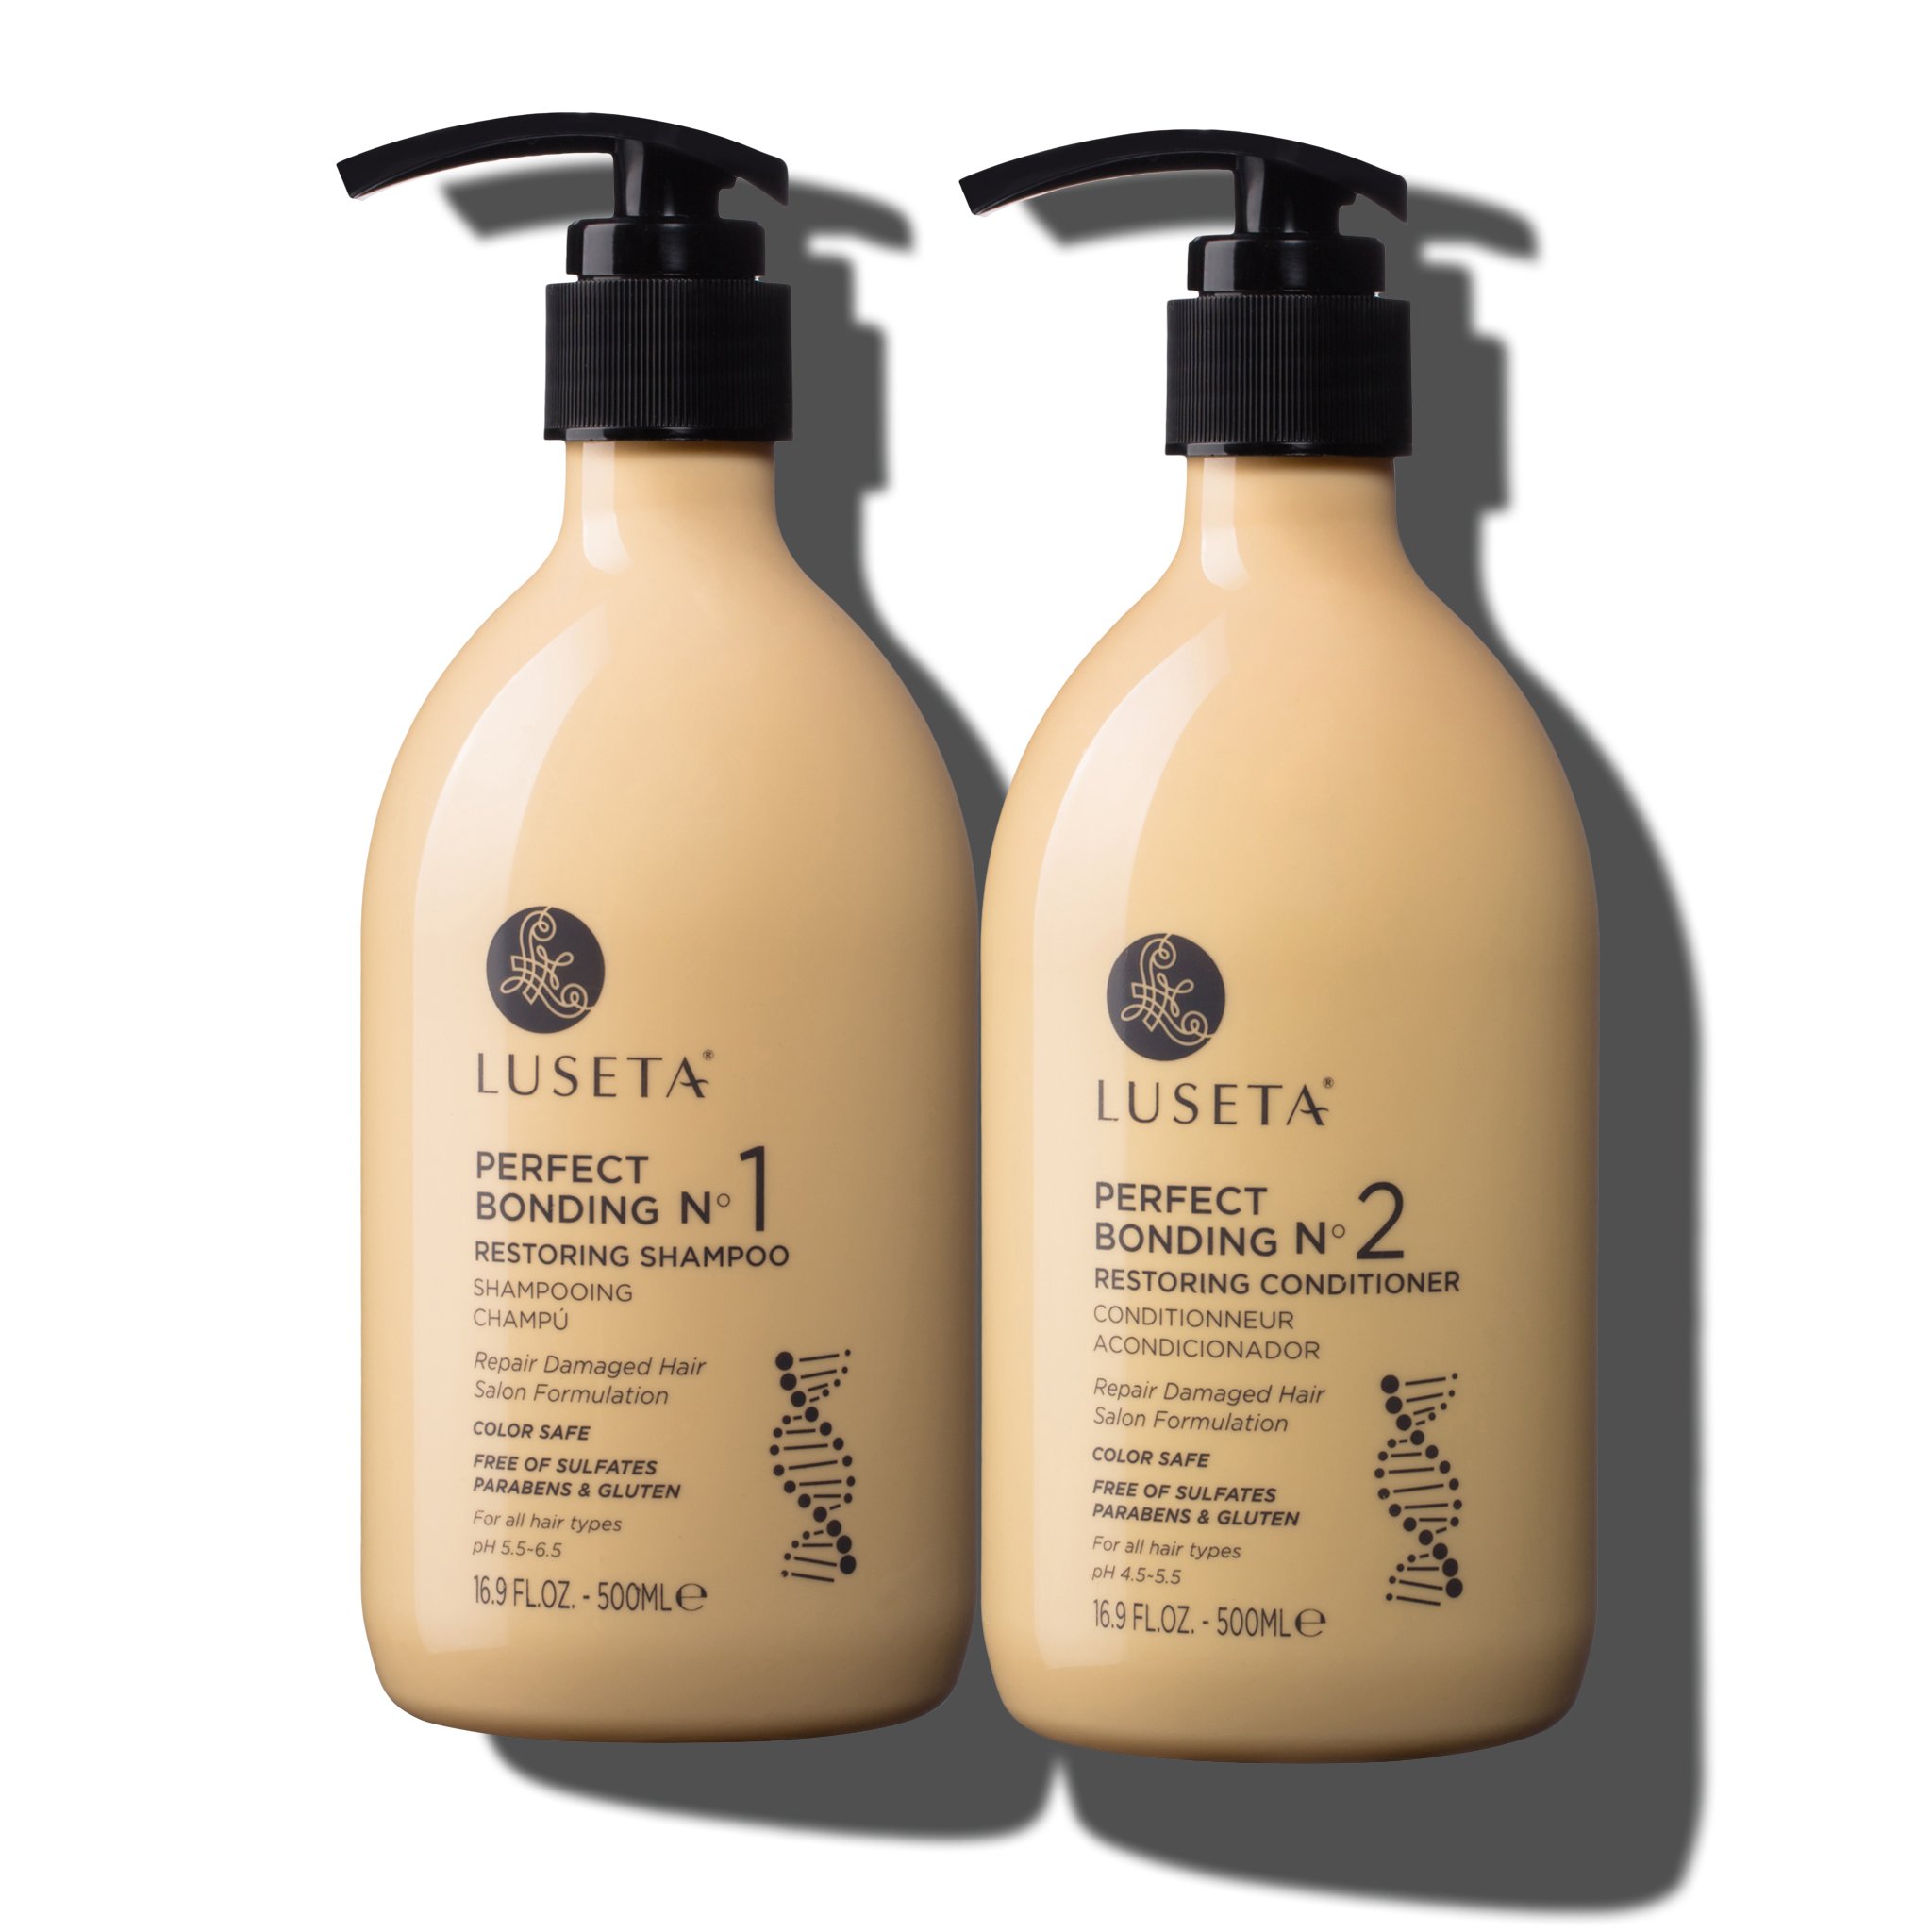 Luseta Perfect Bonding Hair Damage Repair Shampoo &amp; Conditioner Set for All Hair Types - Sulfate Free Paraben Free Color Safe Salon Formulation - image 2 of 6